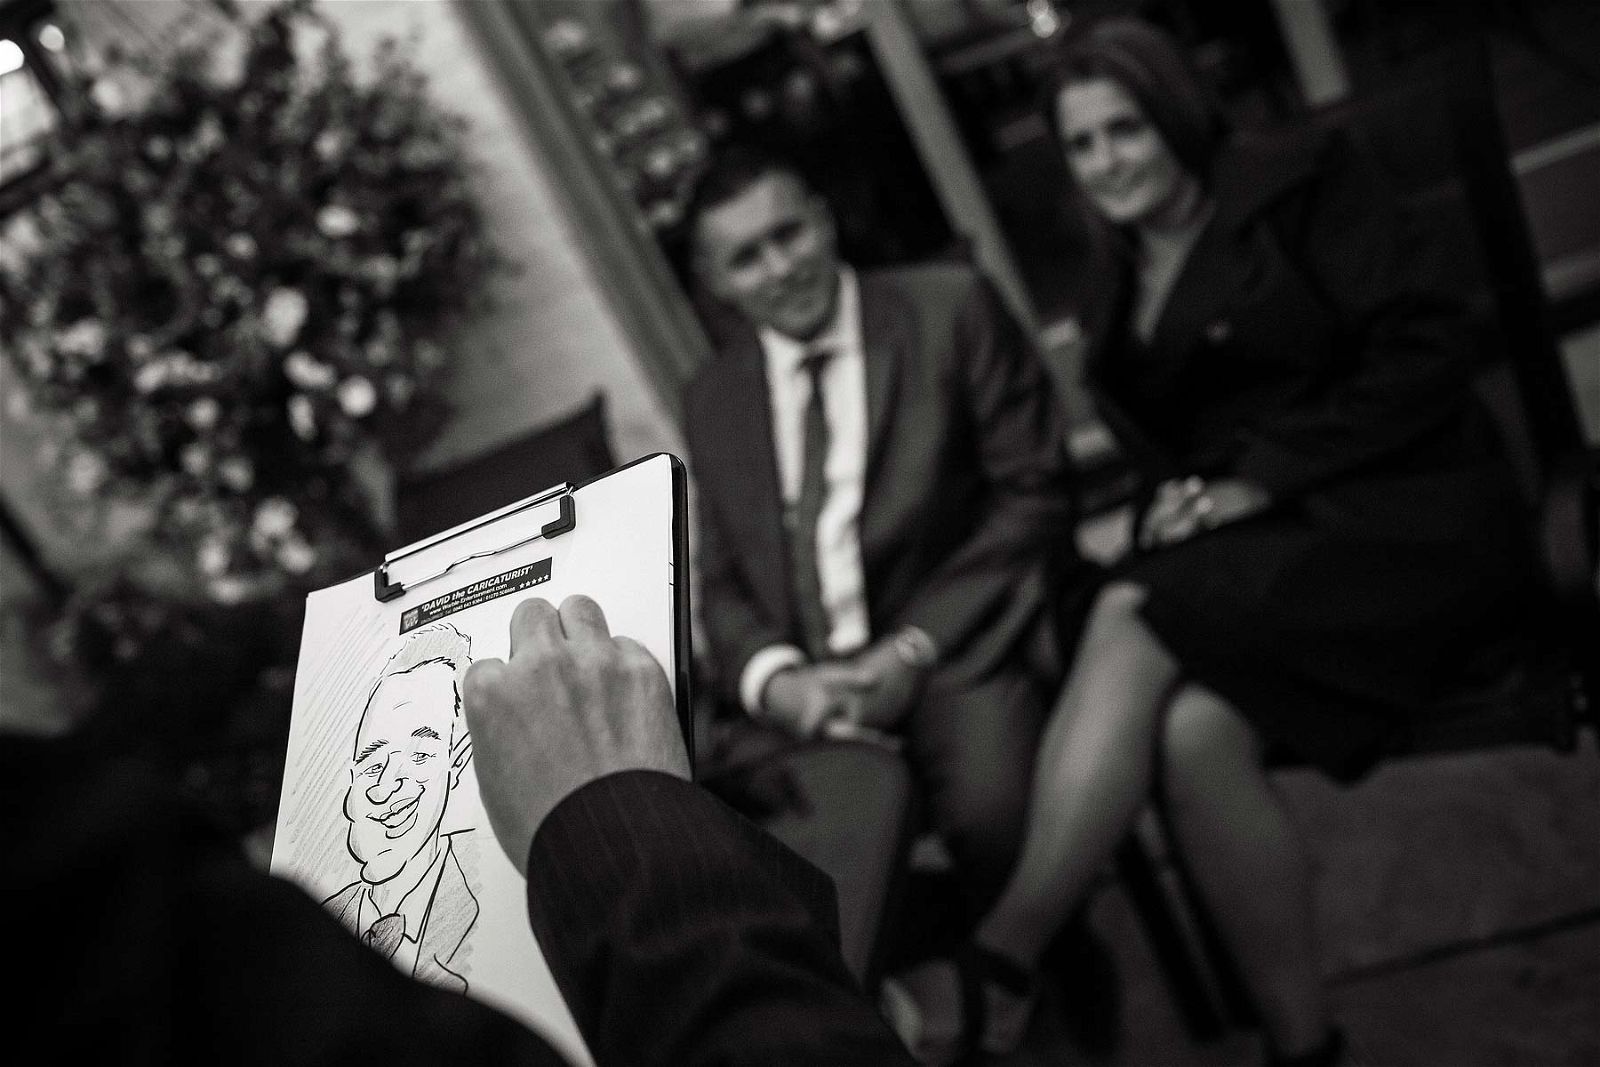 Reportage wedding photography at The Lion Hotel in Brewood by Documentary Wedding Photographer Stuart James